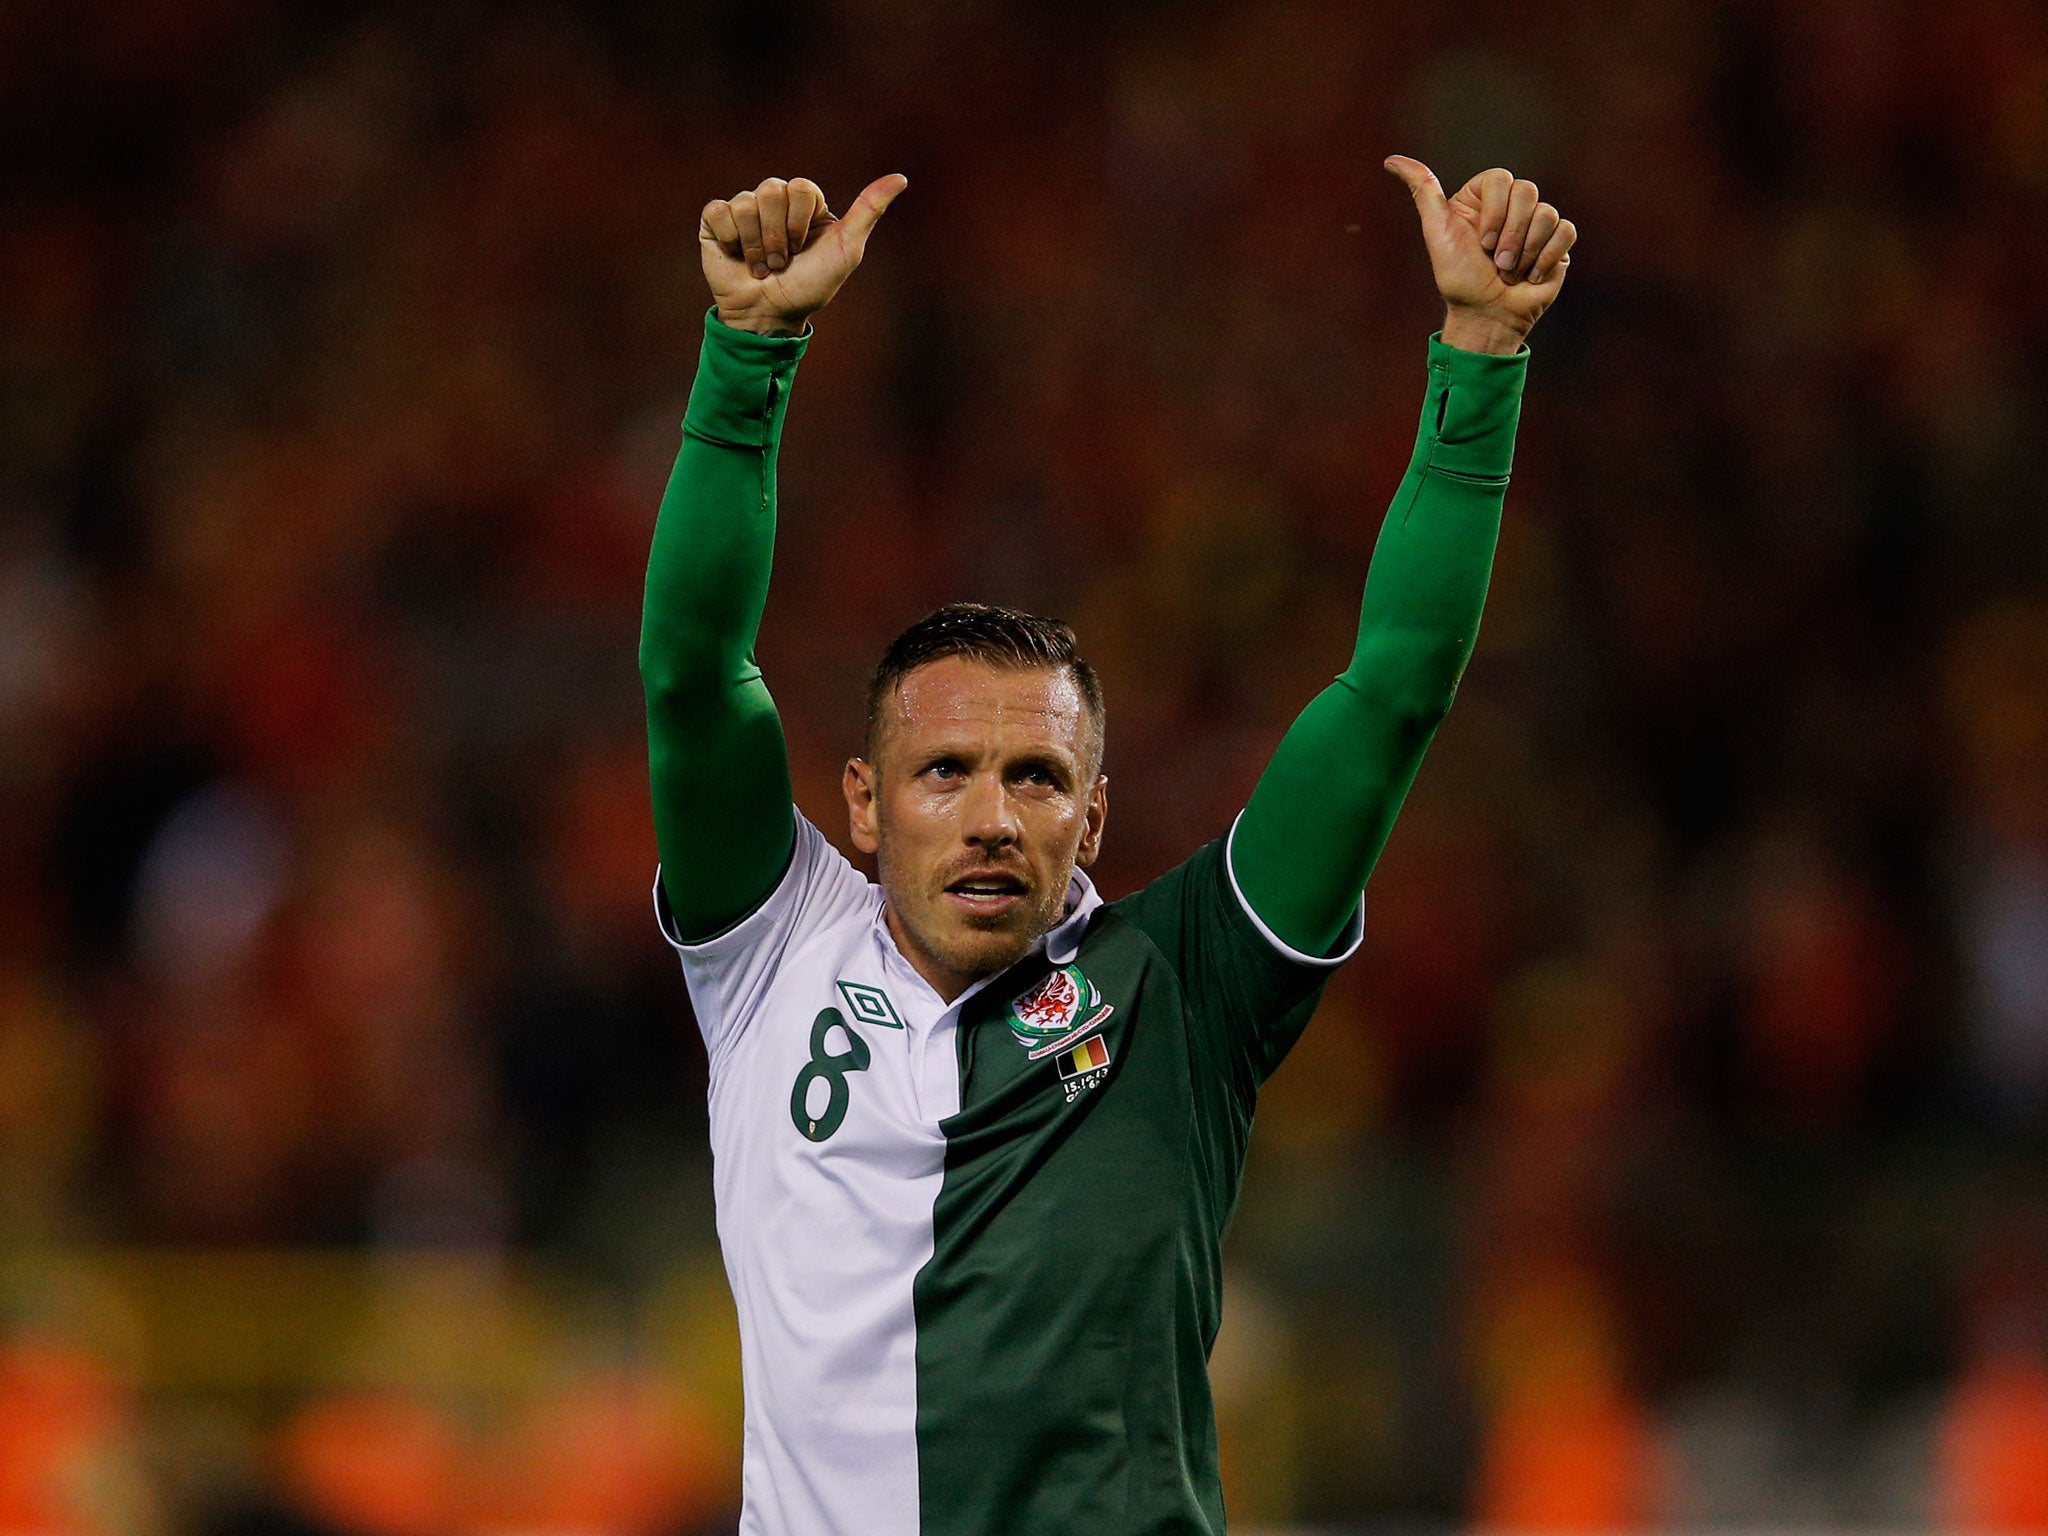 Craig Bellamy waves goodbye to the Wales fans as he retires from international football after their 1-1 draw with Belgium